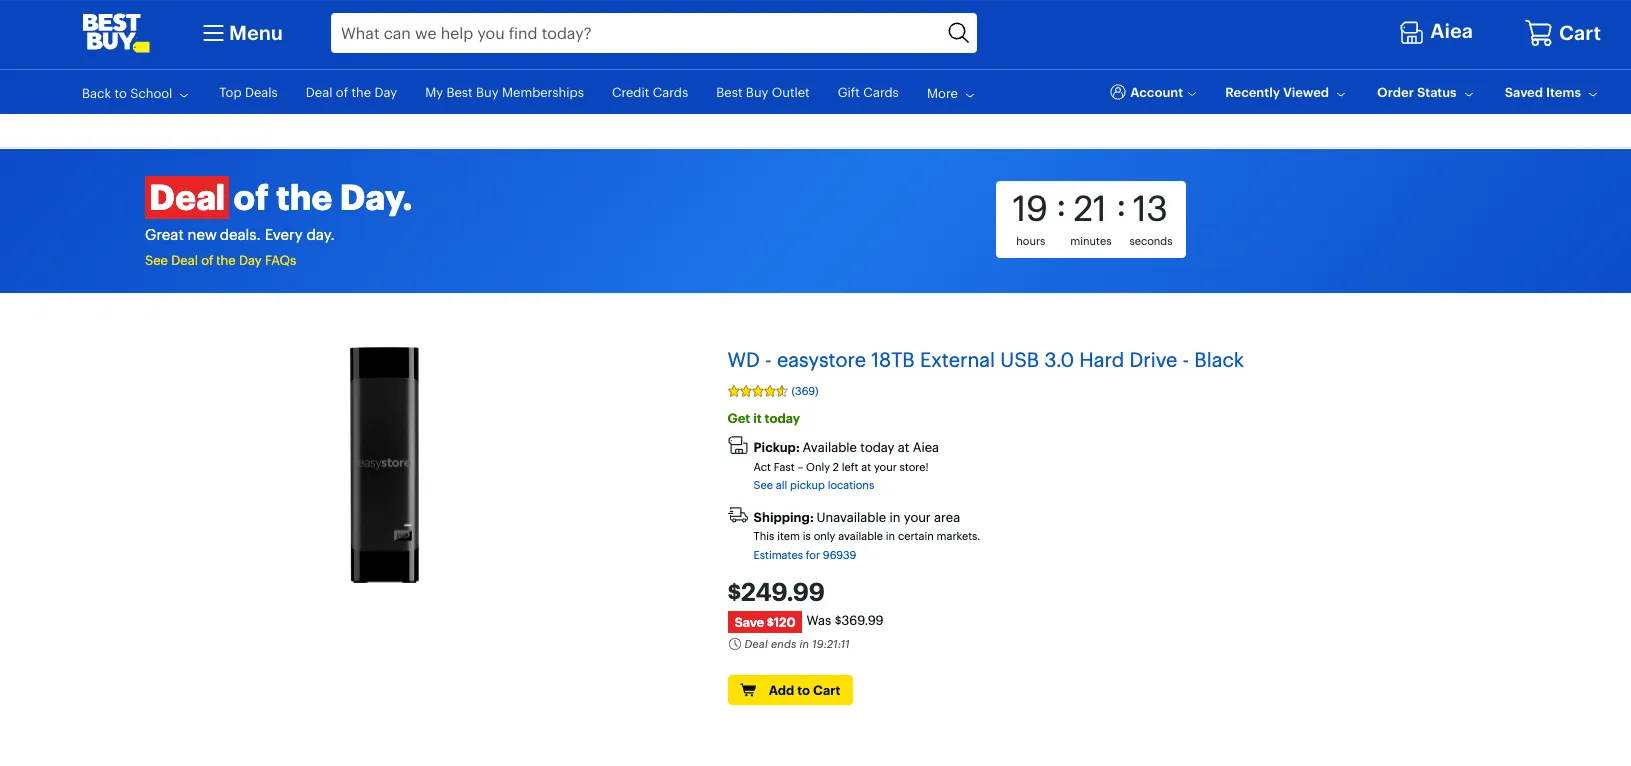 Screenshot of Best Buy’s “Deal of the Day” page